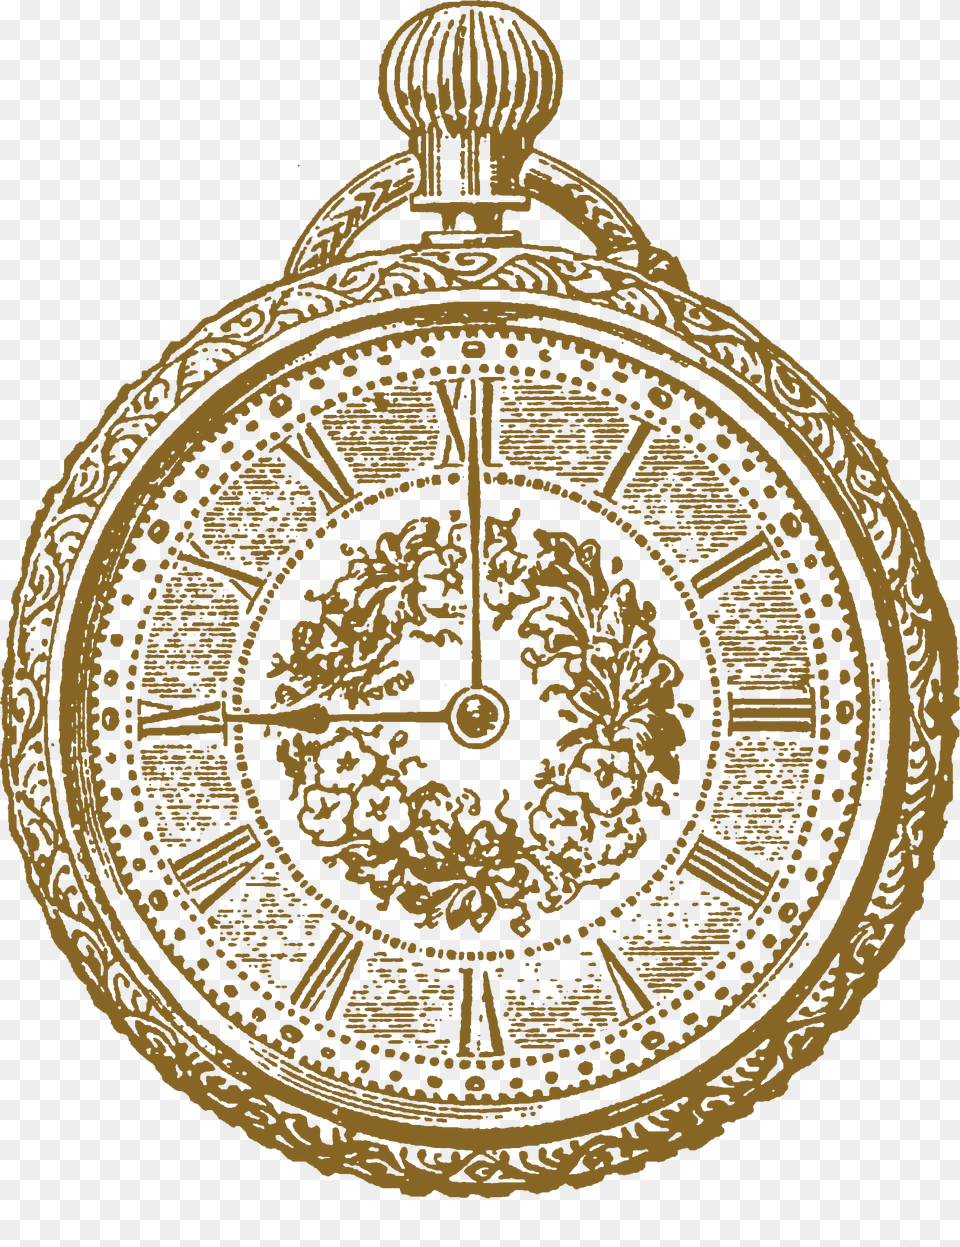 Old Ornate Clock Sepia Tone Portable Network Graphics, Home Decor, Rug Png Image